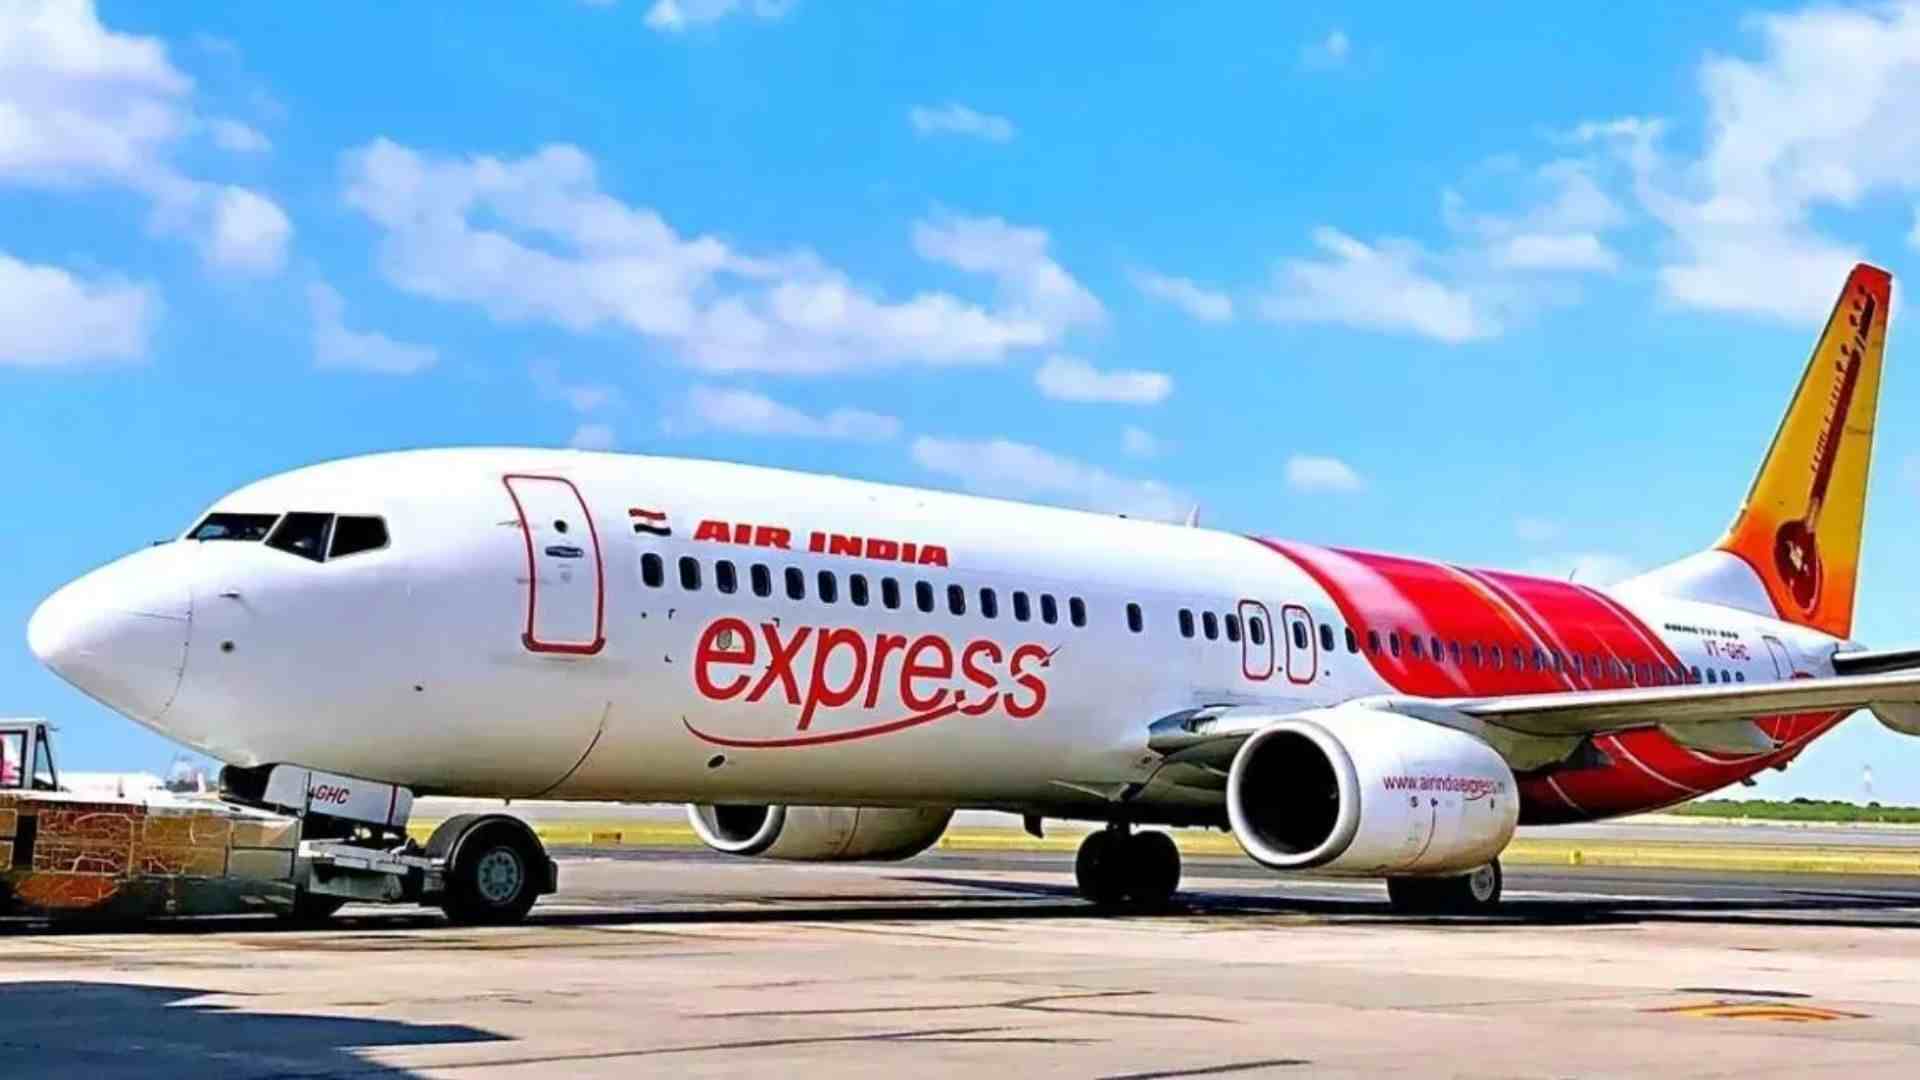 Tata-Owned Air India Express Terminates 25 Employees Amid Crisis Over Mass Sick Leave